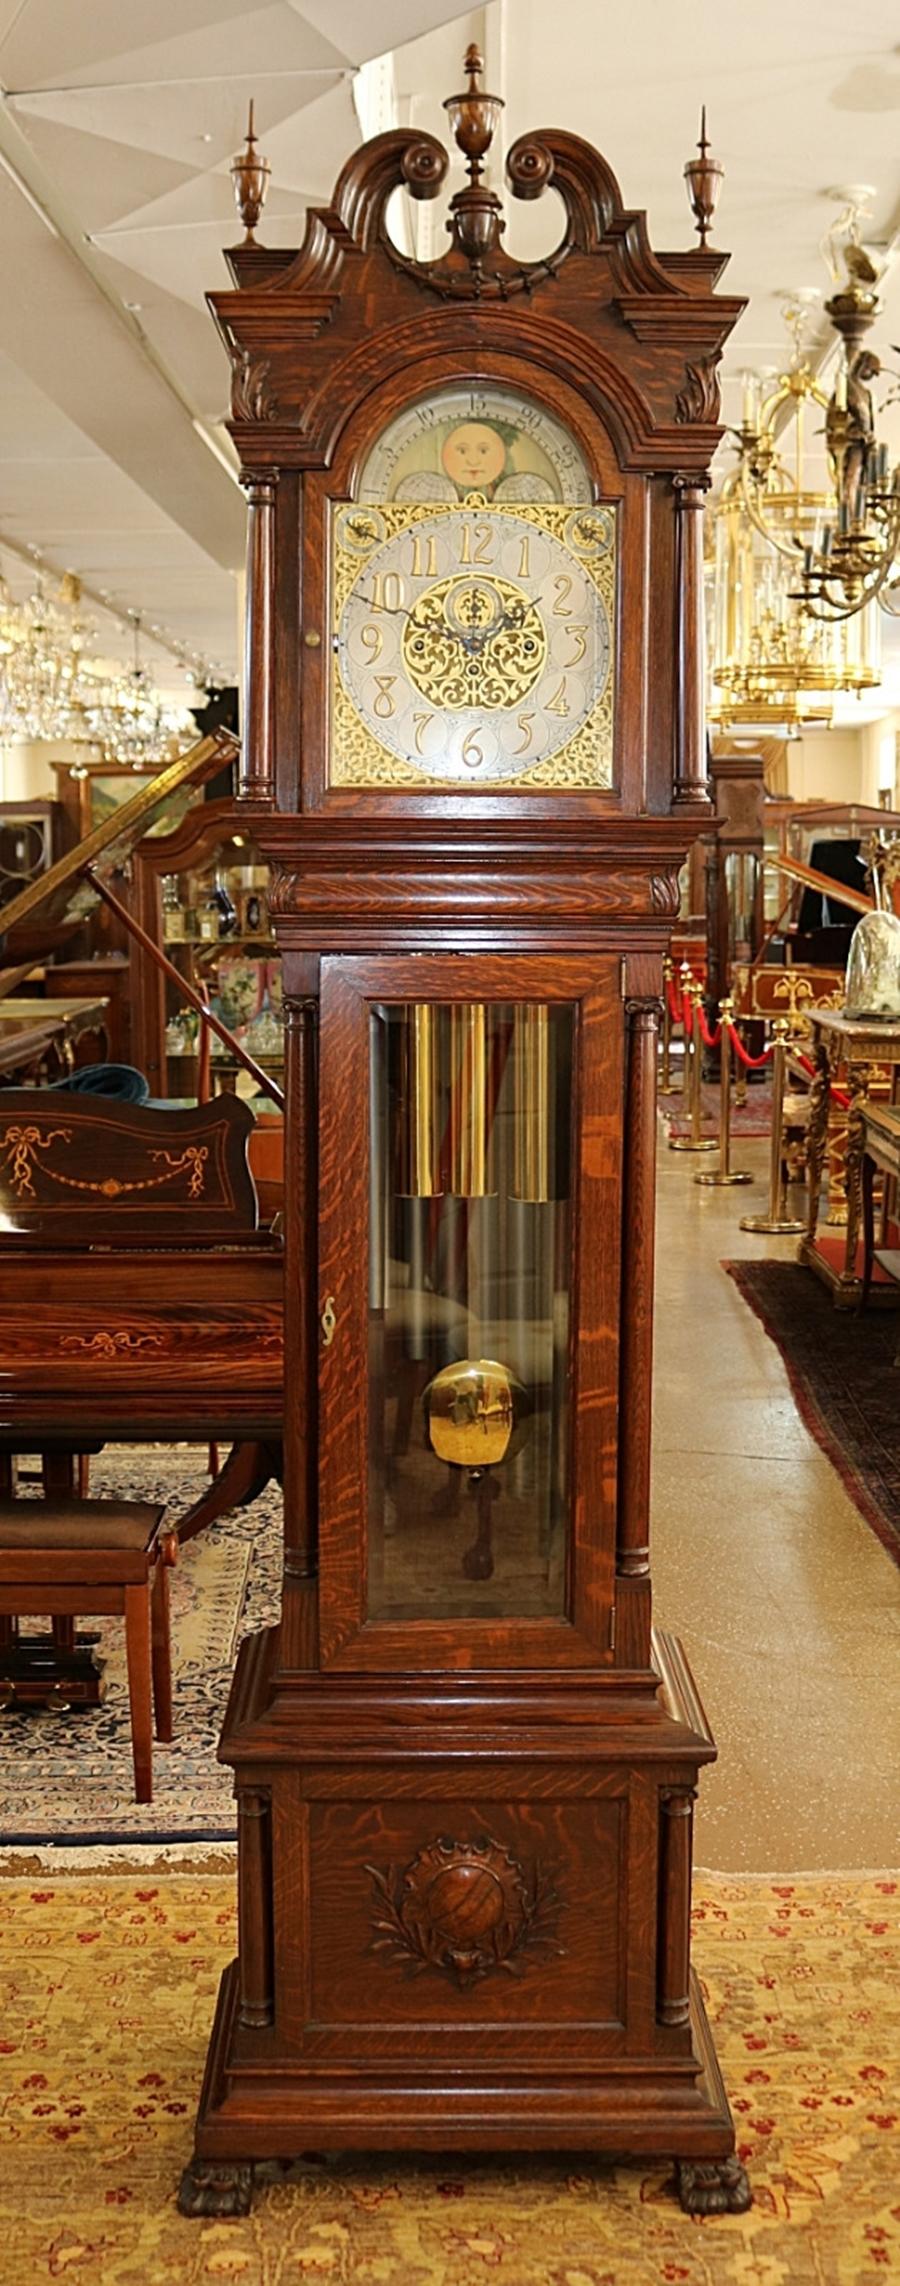 John Wanamaker Philadelphia Oak 9 Tube Grandfather Tall Case Clock  Circa 1904

Dimensions : 102 Tall X 28 Wide X 19 Deep

This gorgeous clock was made in the early 20th century and was retailed by John Wanamaker in Philadelphia. The clock has a 9